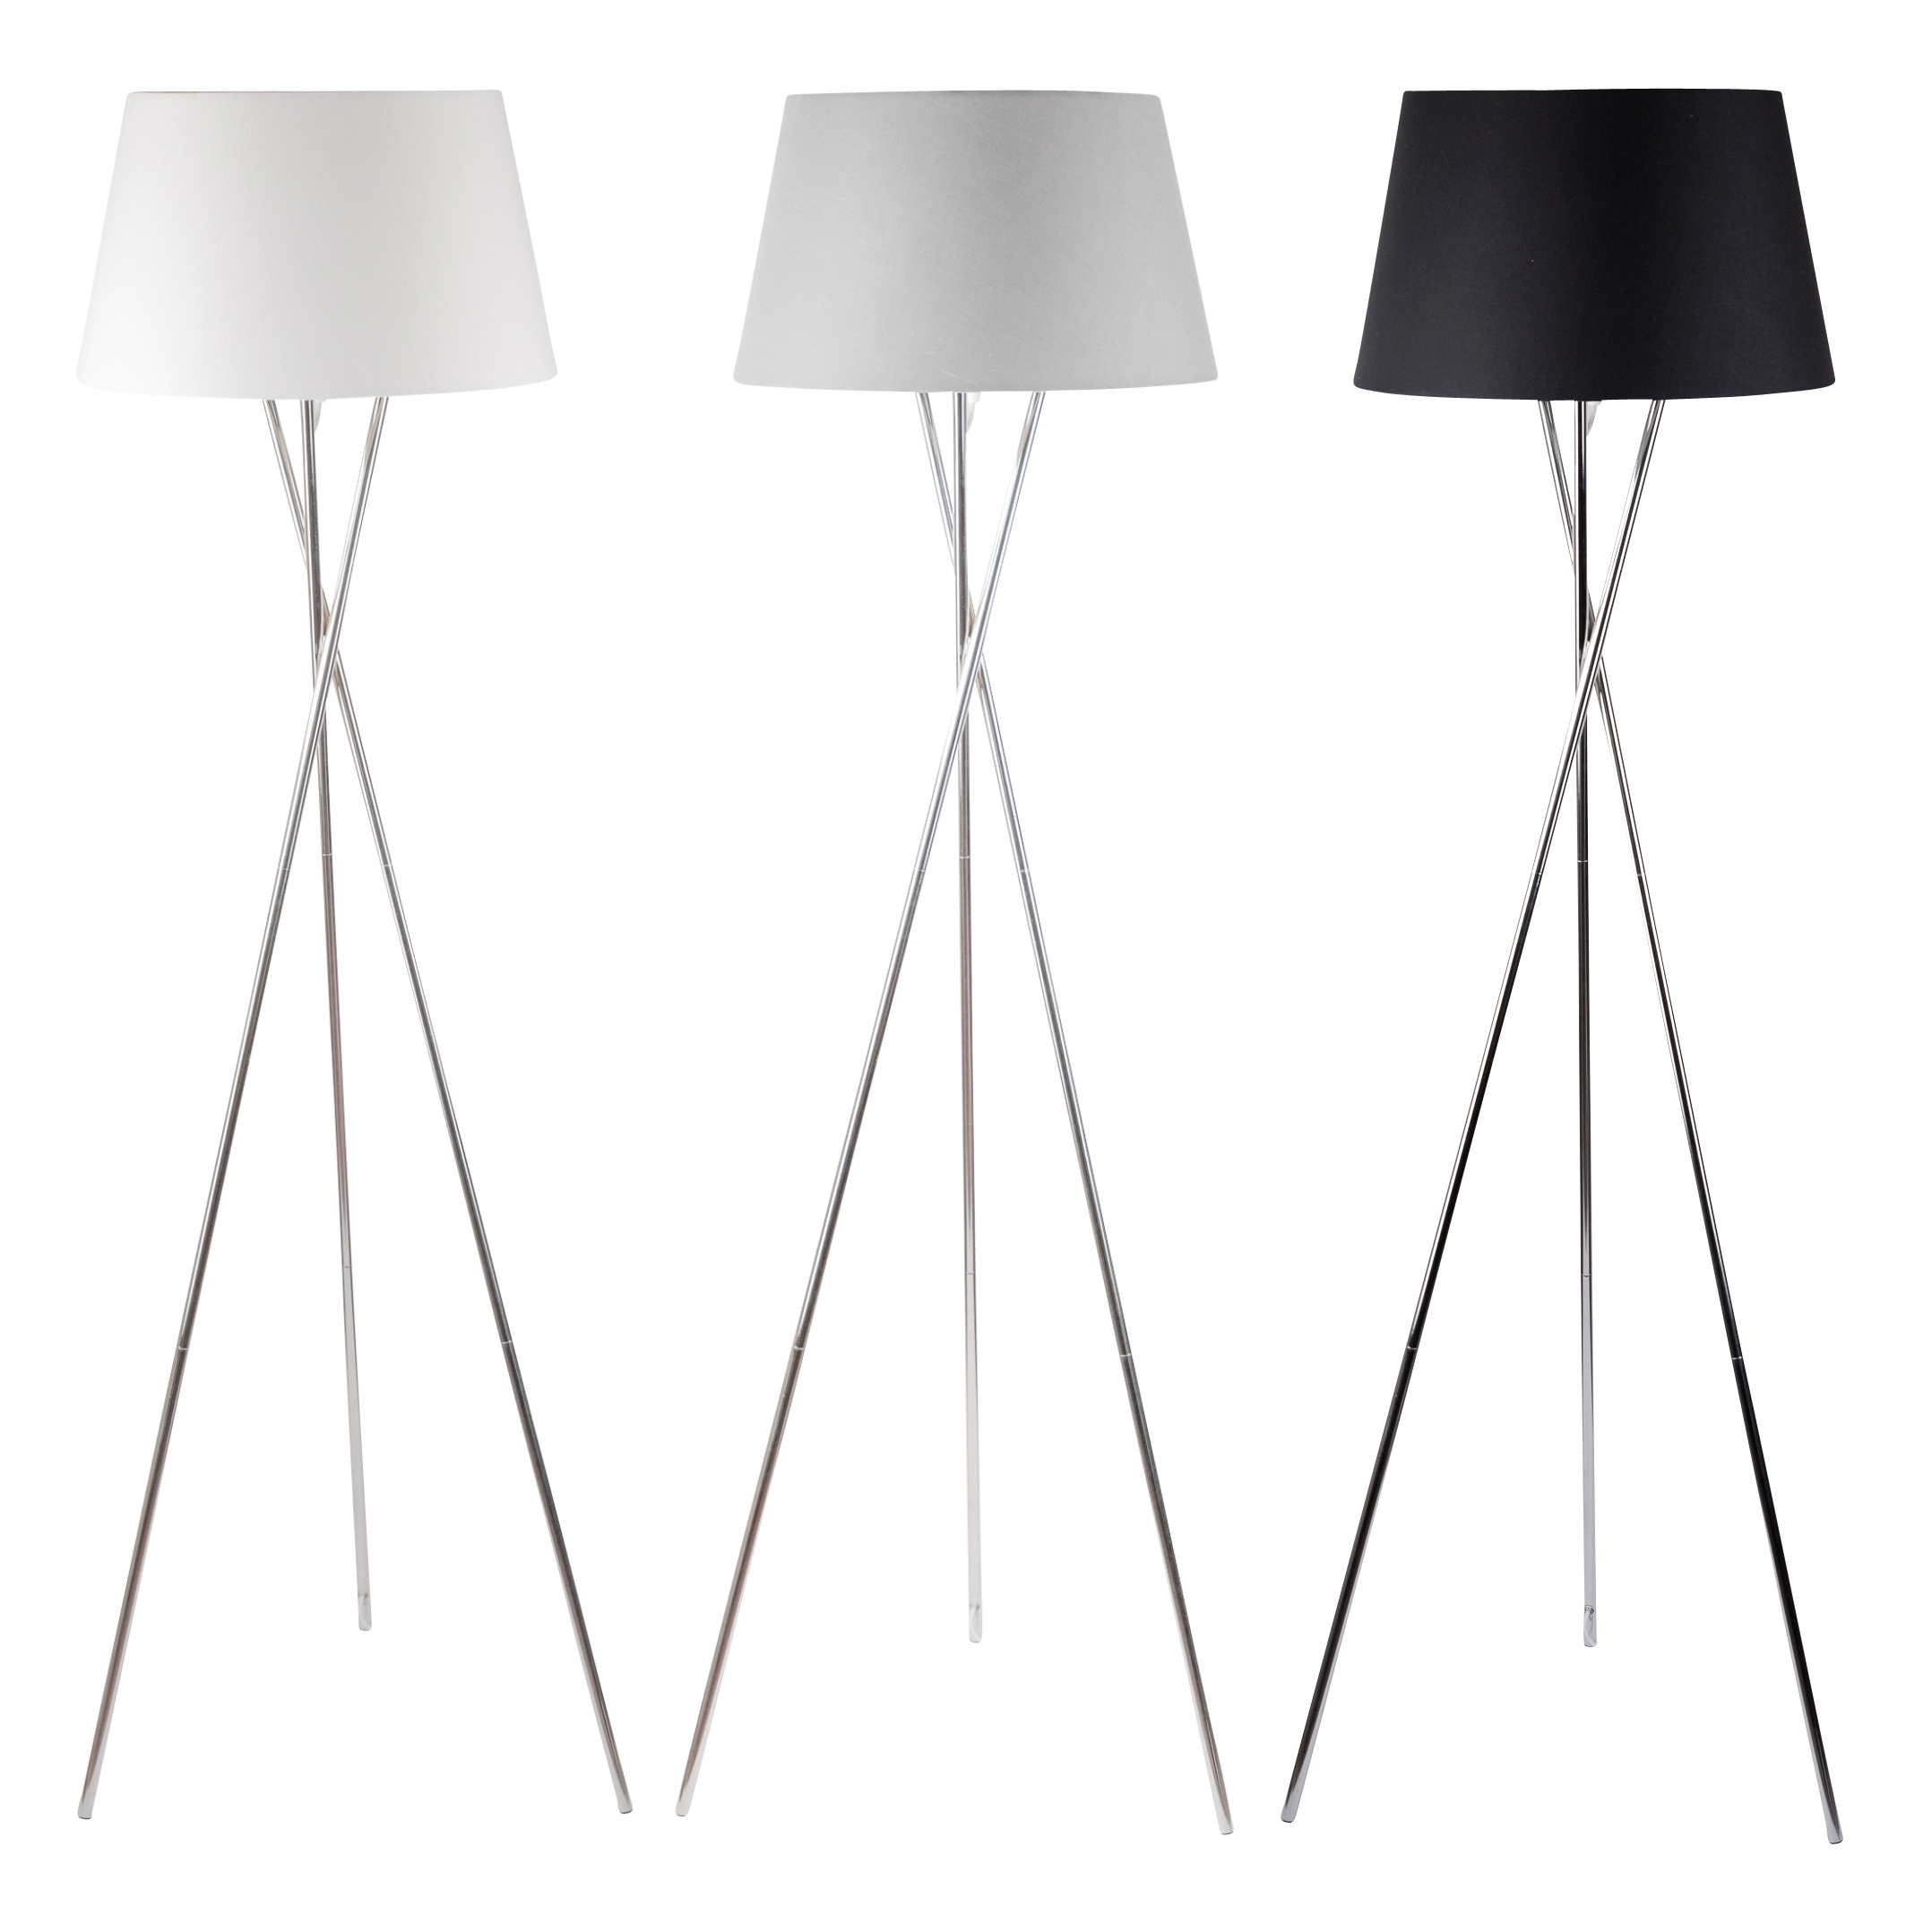 Details About Modern Chrome Twist Tripod Floor Lamp Standard Light Grey White Or Black Shade within dimensions 2156 X 2156